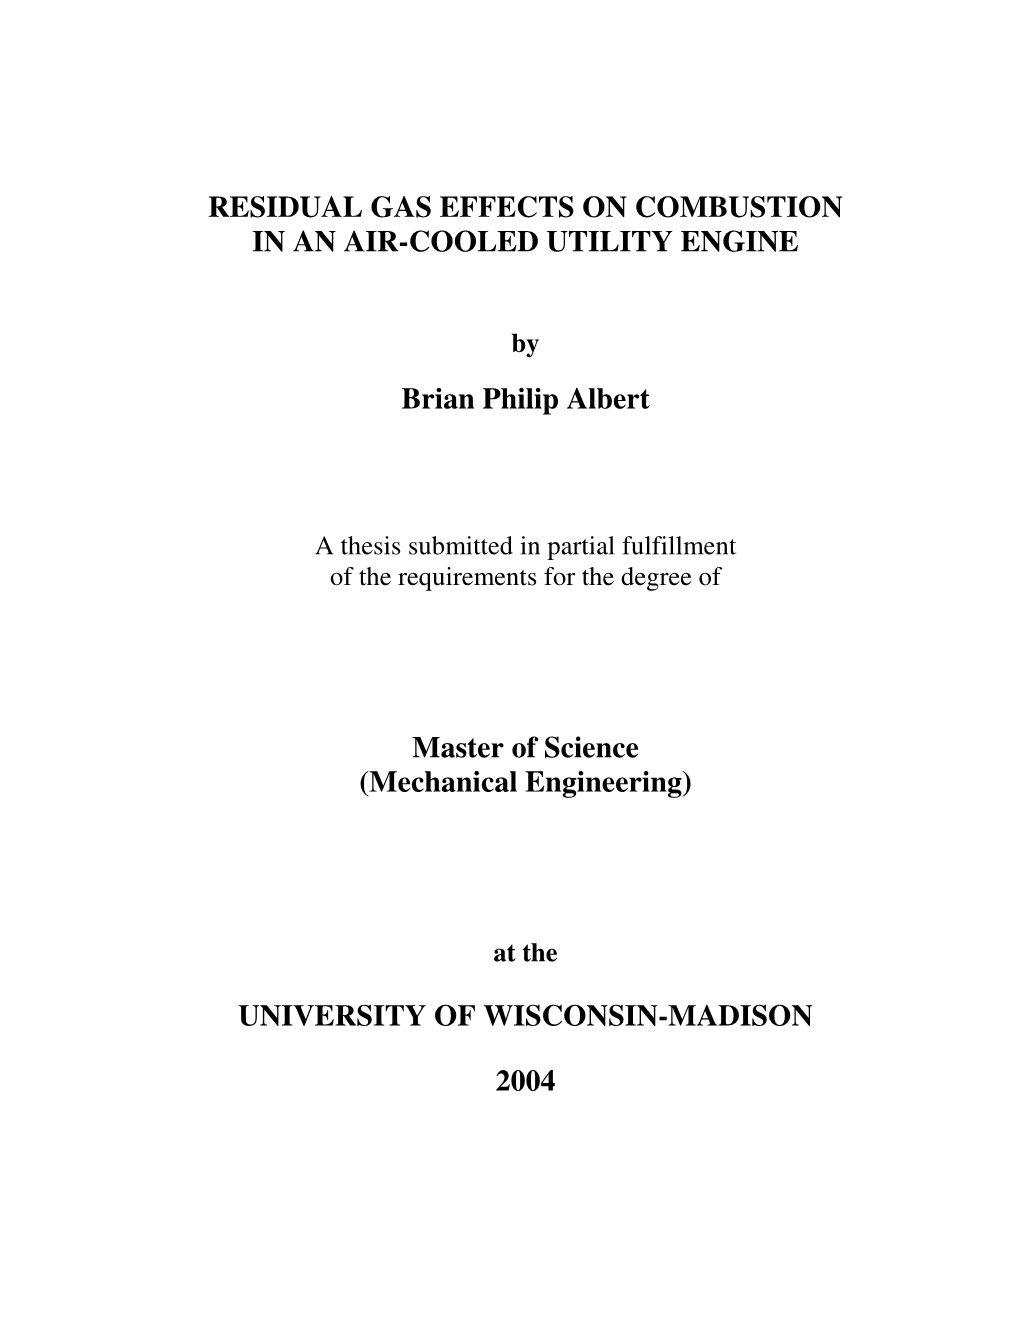 Residual Gas Effects on Combustion in an Air-Cooled Utility Engine